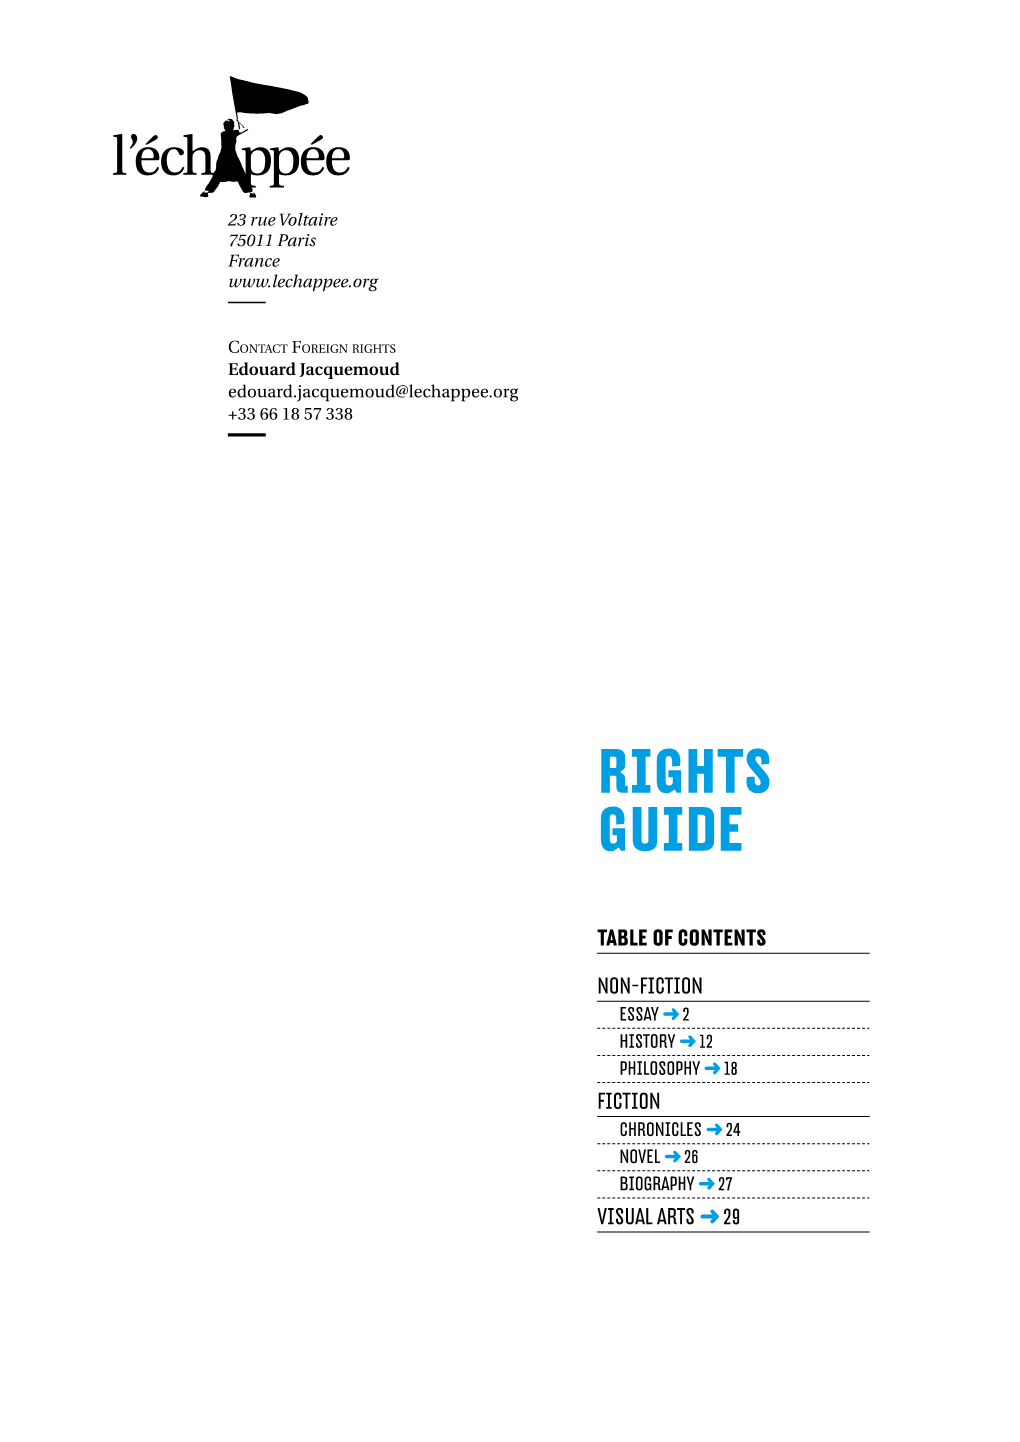 Rights Guide